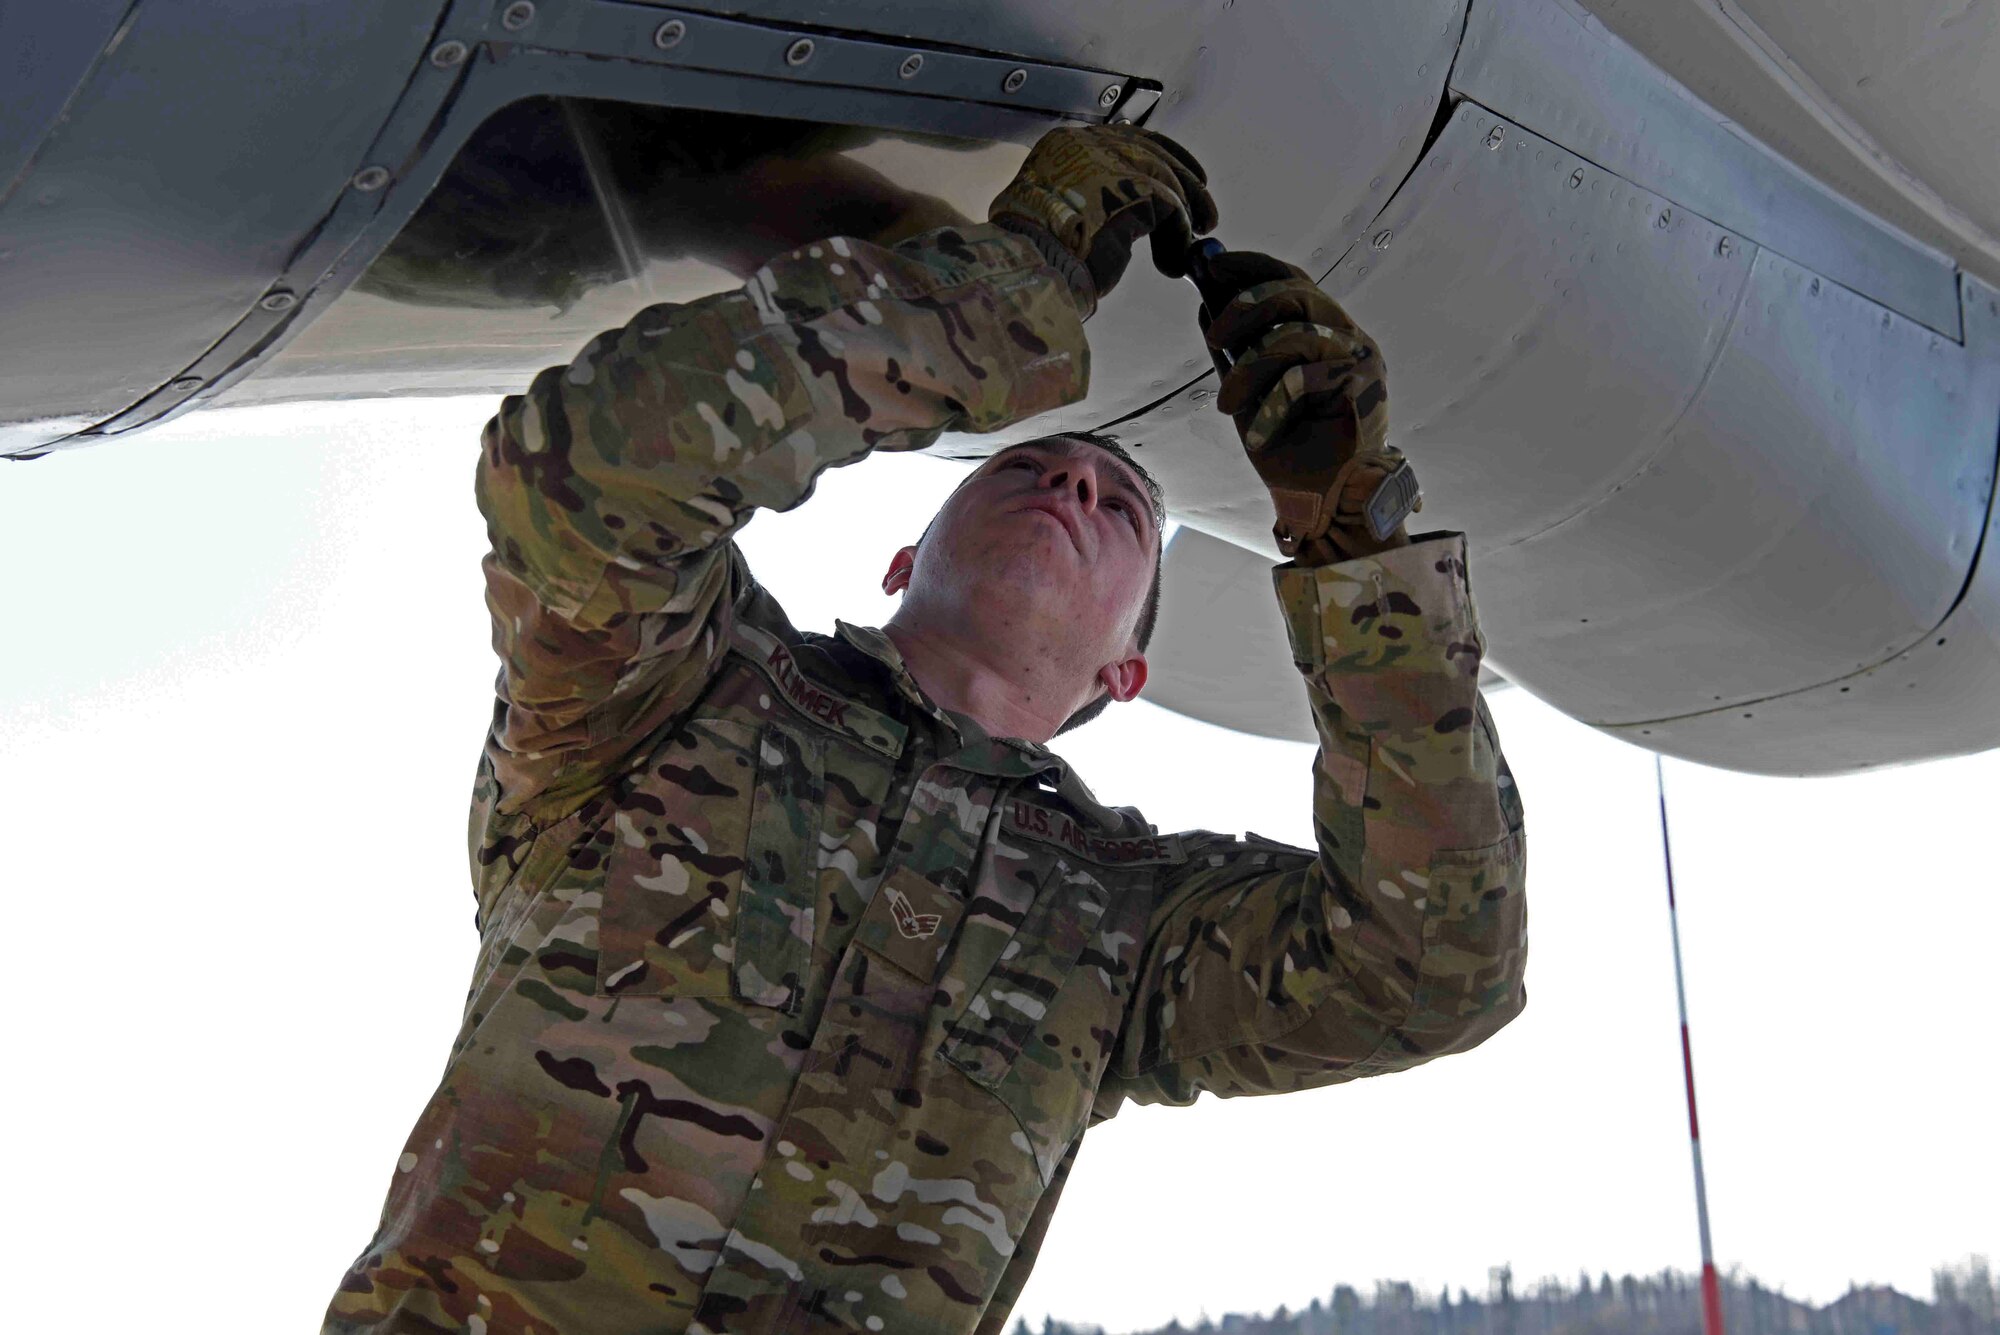 U.S. Air Force Senior Airman Christian Klimek, 100th Aircraft Maintenance Squadron flying crew chief, preps the boom operator pod prior to take-off for refueling training with Romanian air force F-16s in Bucharest, Romania, March 13, 2019. The training was an example of U.S. and NATO allies sharing a commitment to promote peace and stability through developing their relationship and communication process. (U.S. Air Force photo by Airman 1st Class Brandon Esau)